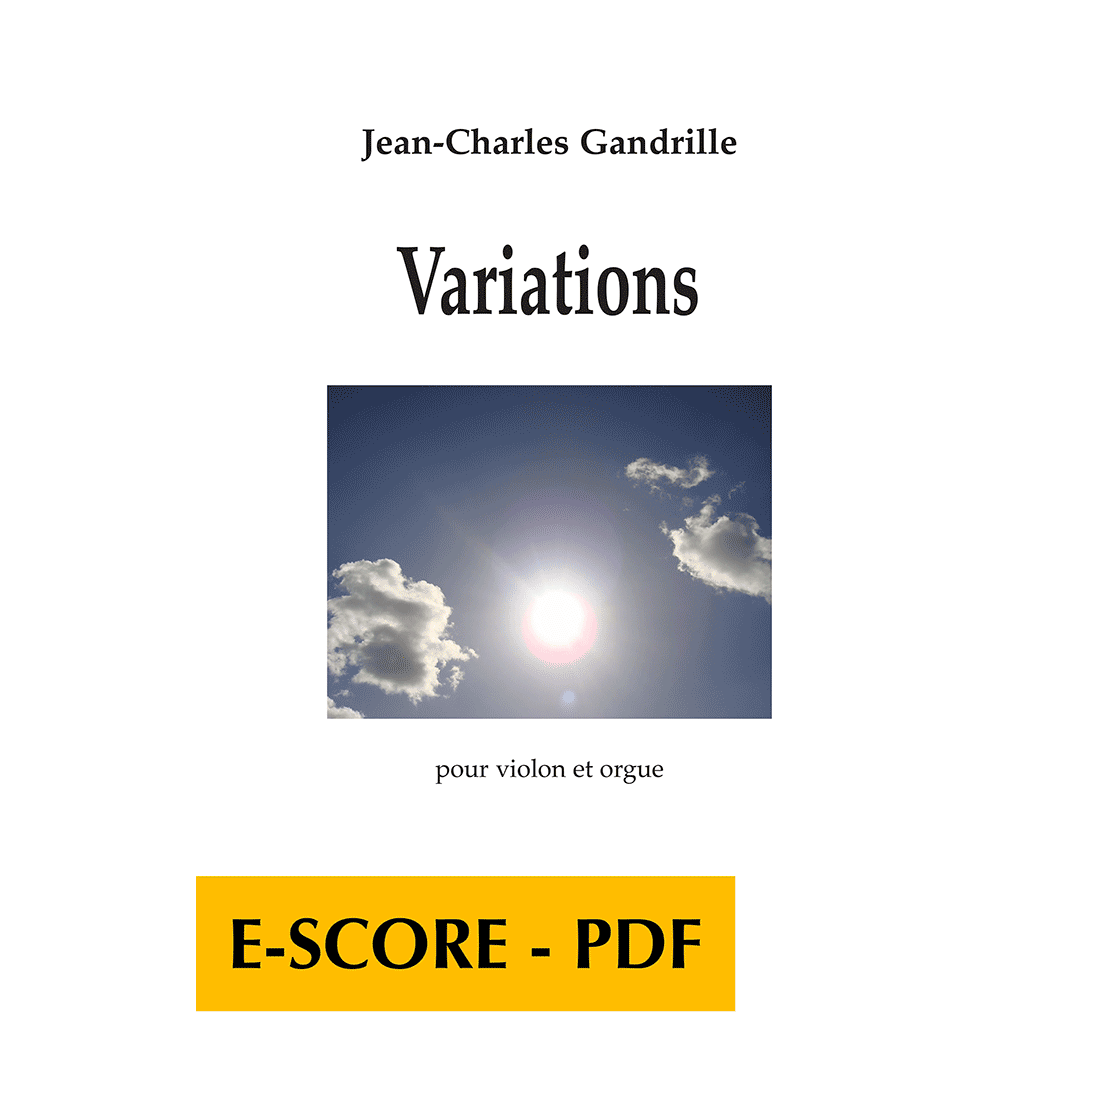 Variations for violin and organ - E-score PDF